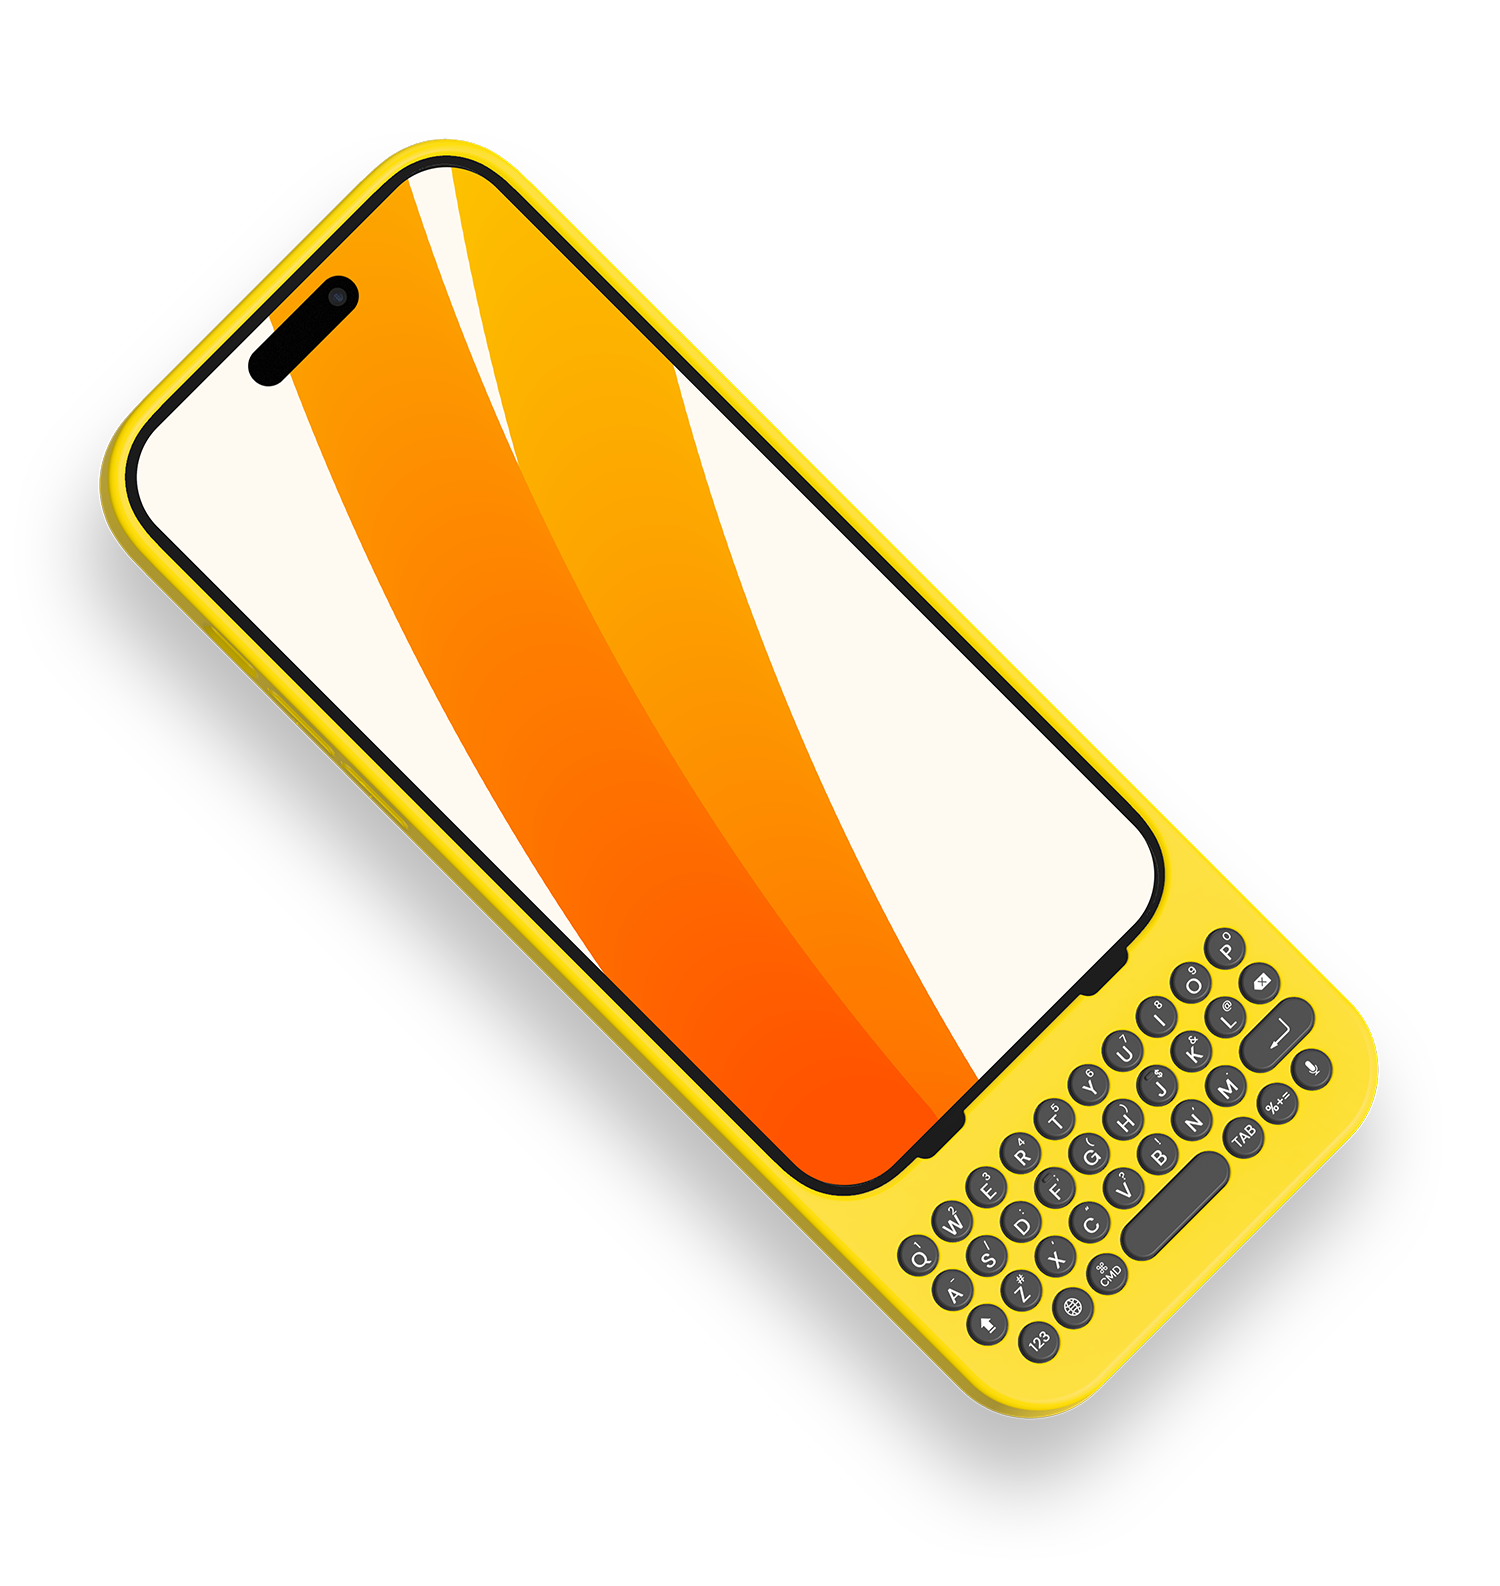 Clicks Launched Physical Keyboard Case for iPhones at CES